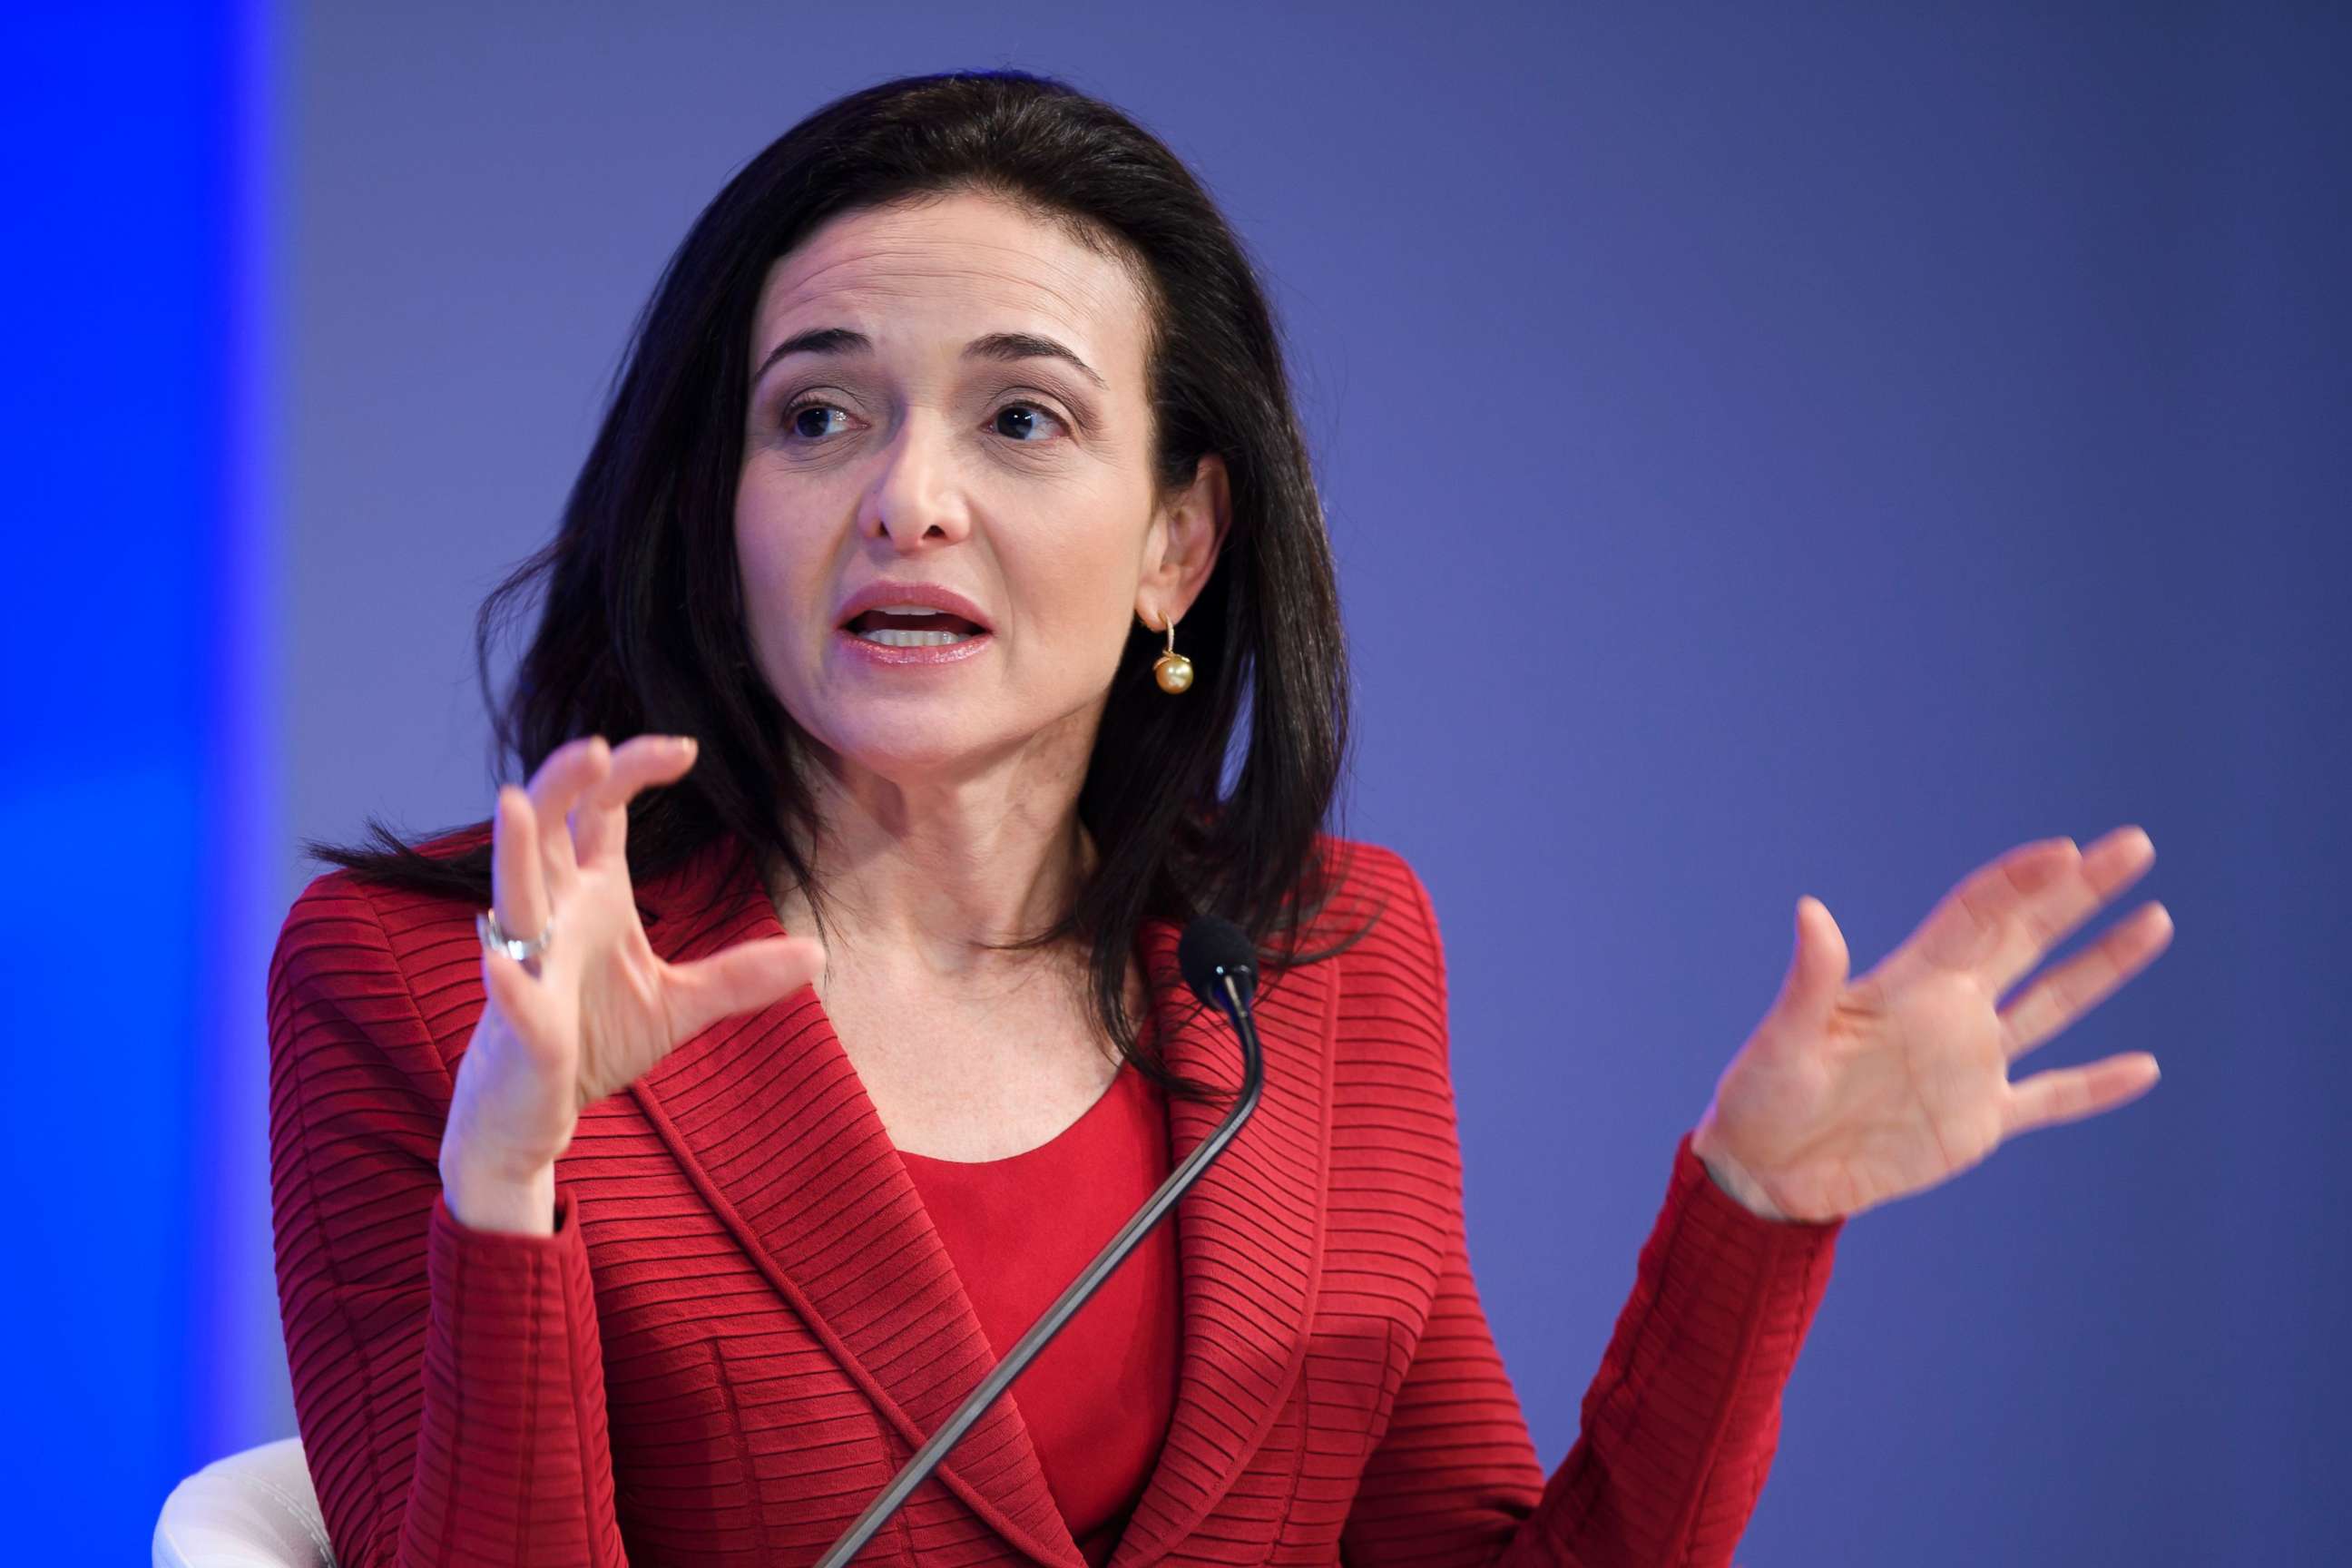 PHOTO: Sheryl Sandberg, Chief Operating Officer (COO) of Facebook, speaks during a session at the Congress centre on the second day of the World Economic Forum, Jan. 18, 2017, in Davos, Switzerland.